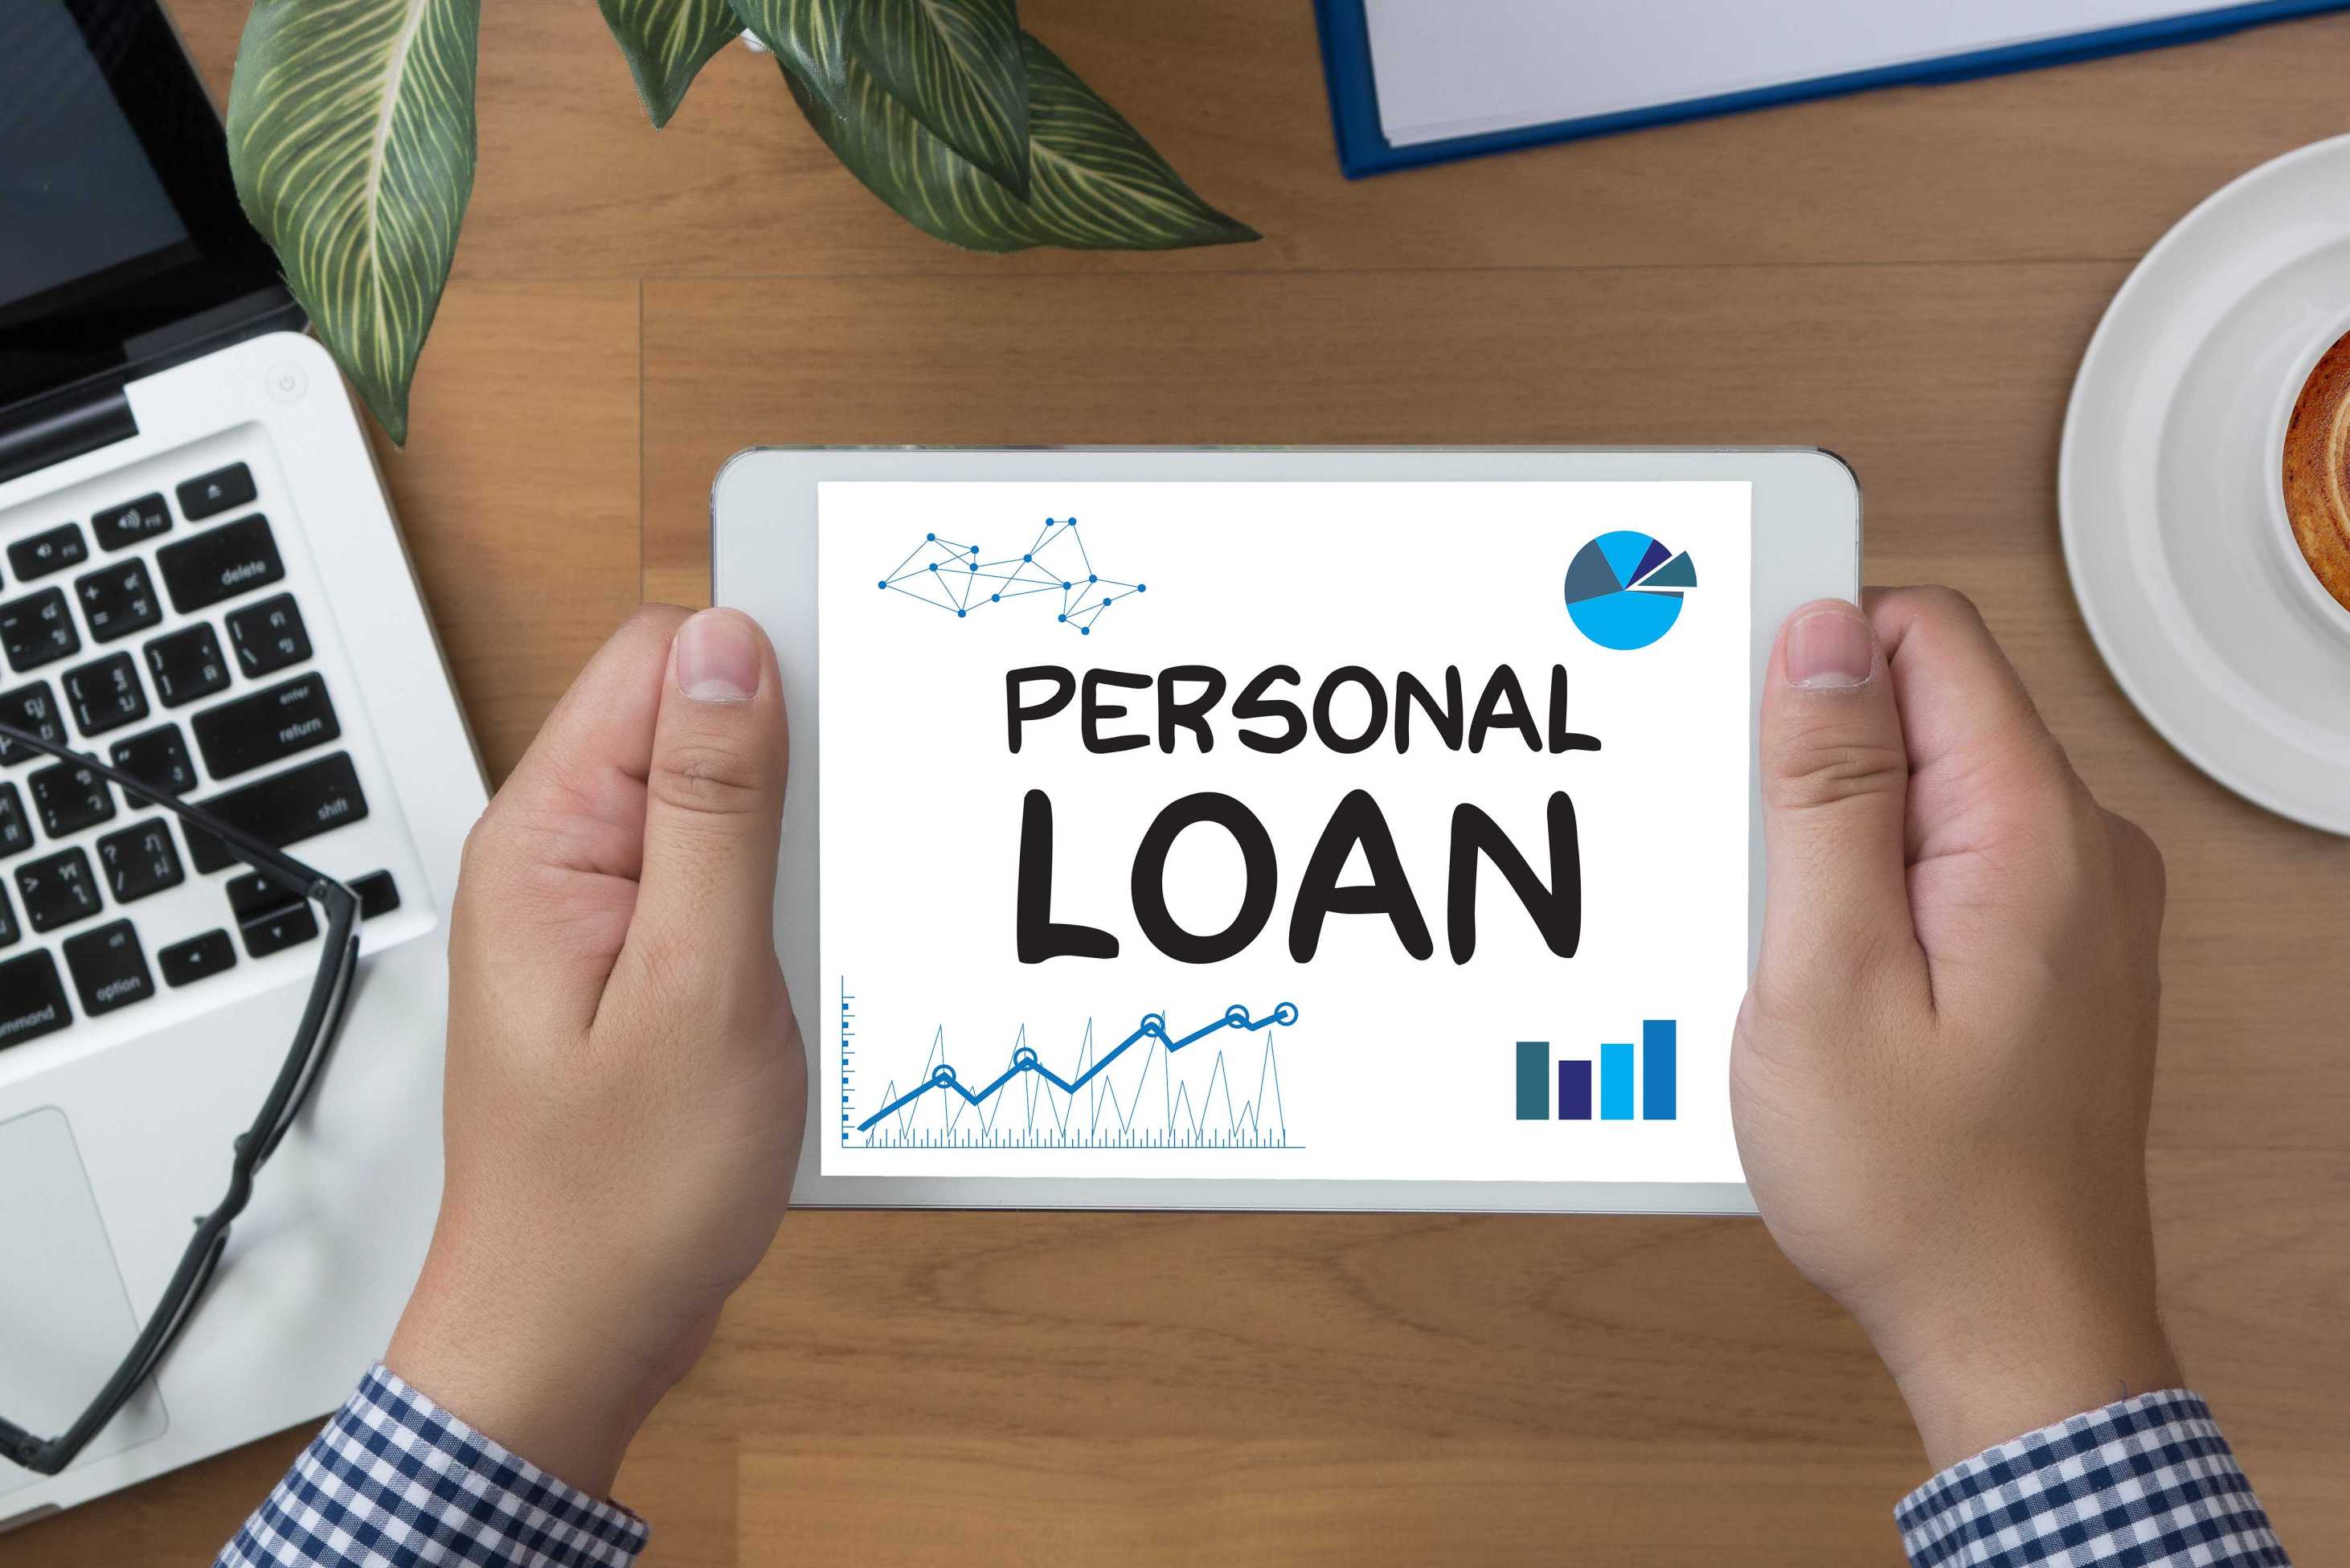 All You Need to Know About Pre-Approved Personal Loans